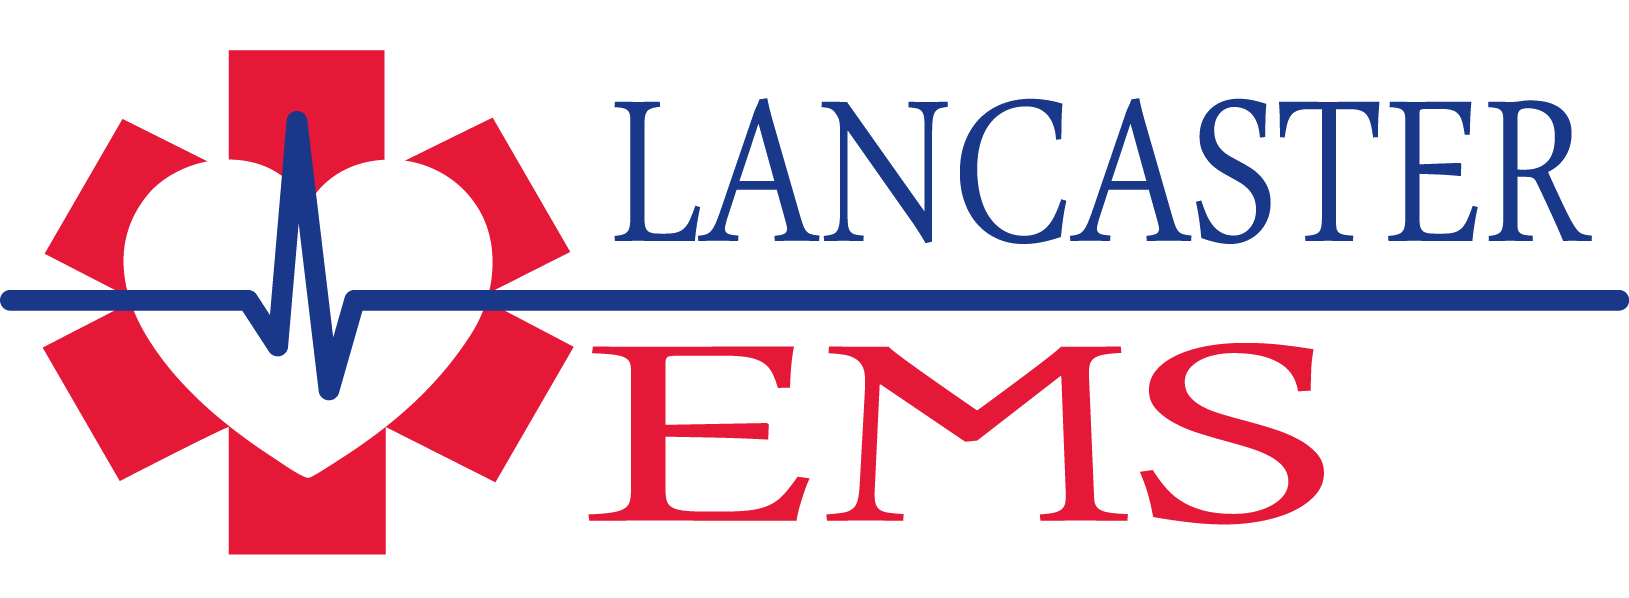 Lancaster EMS logo features blue and red lettering